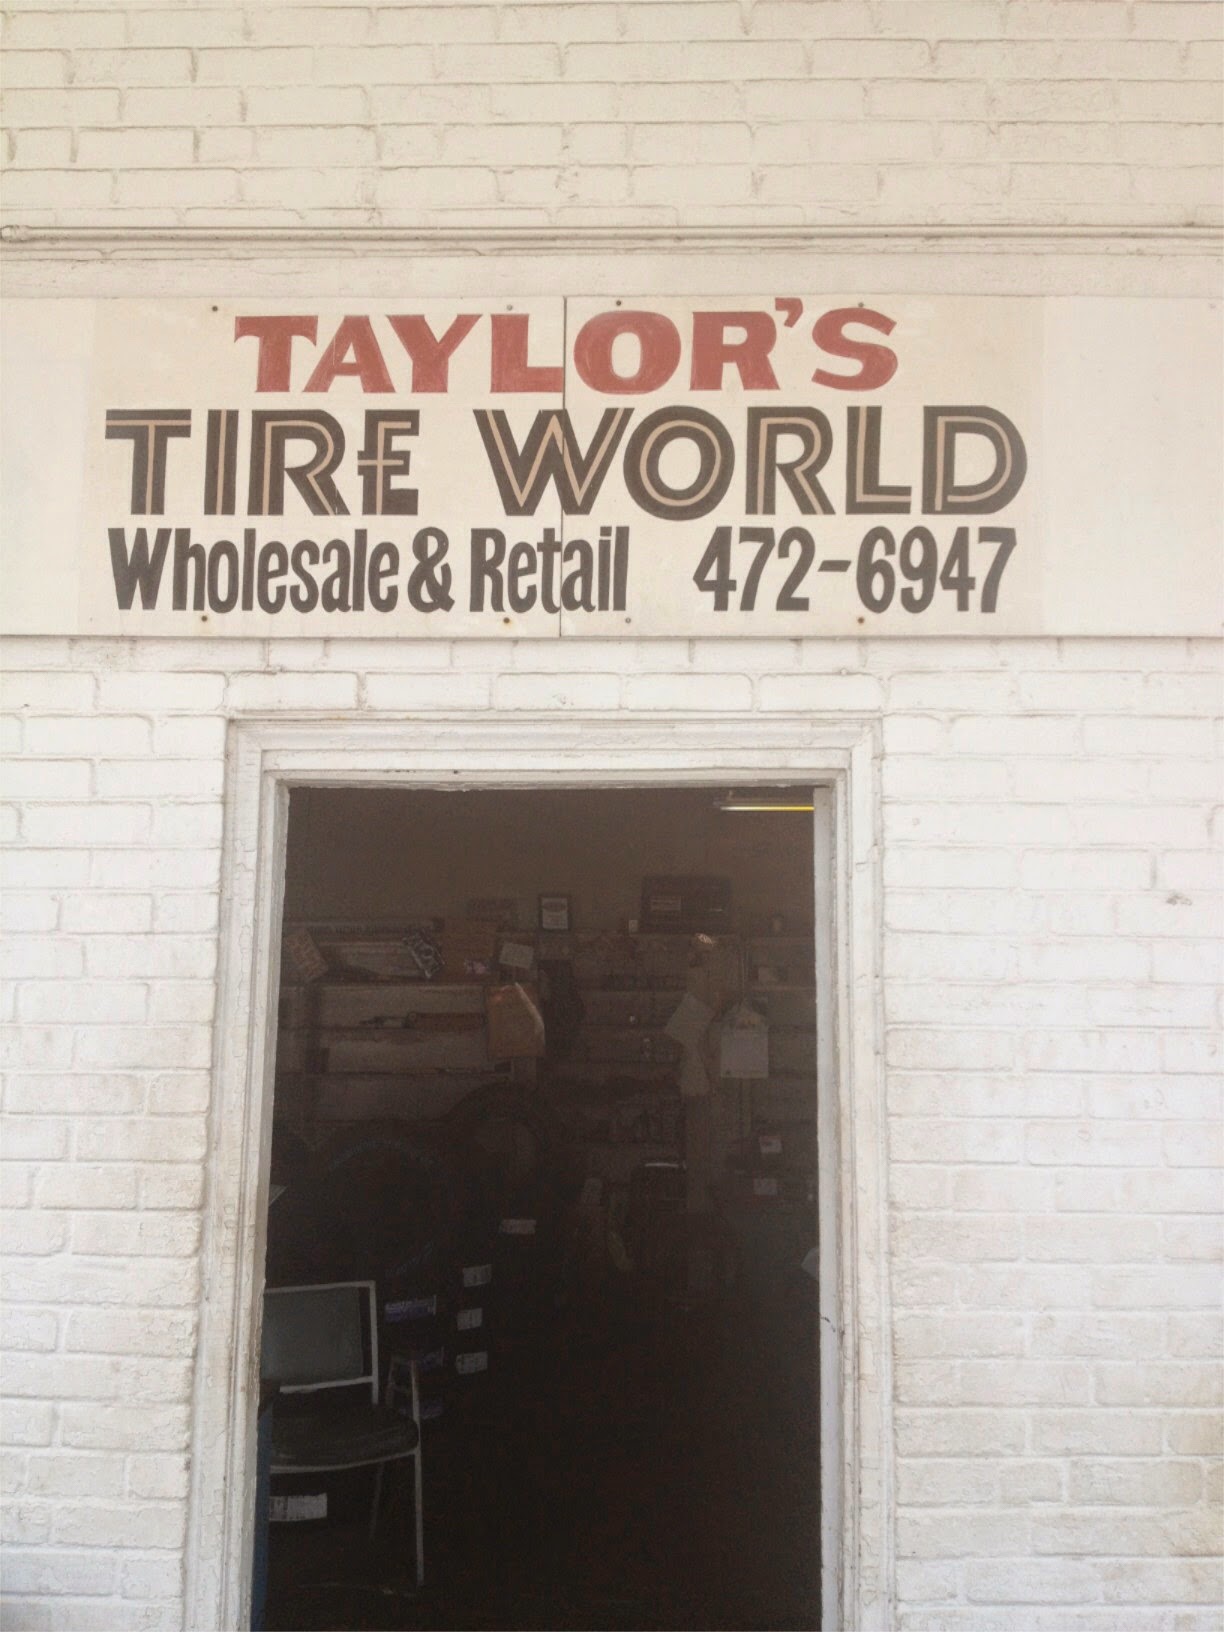 Taylor's Tire World